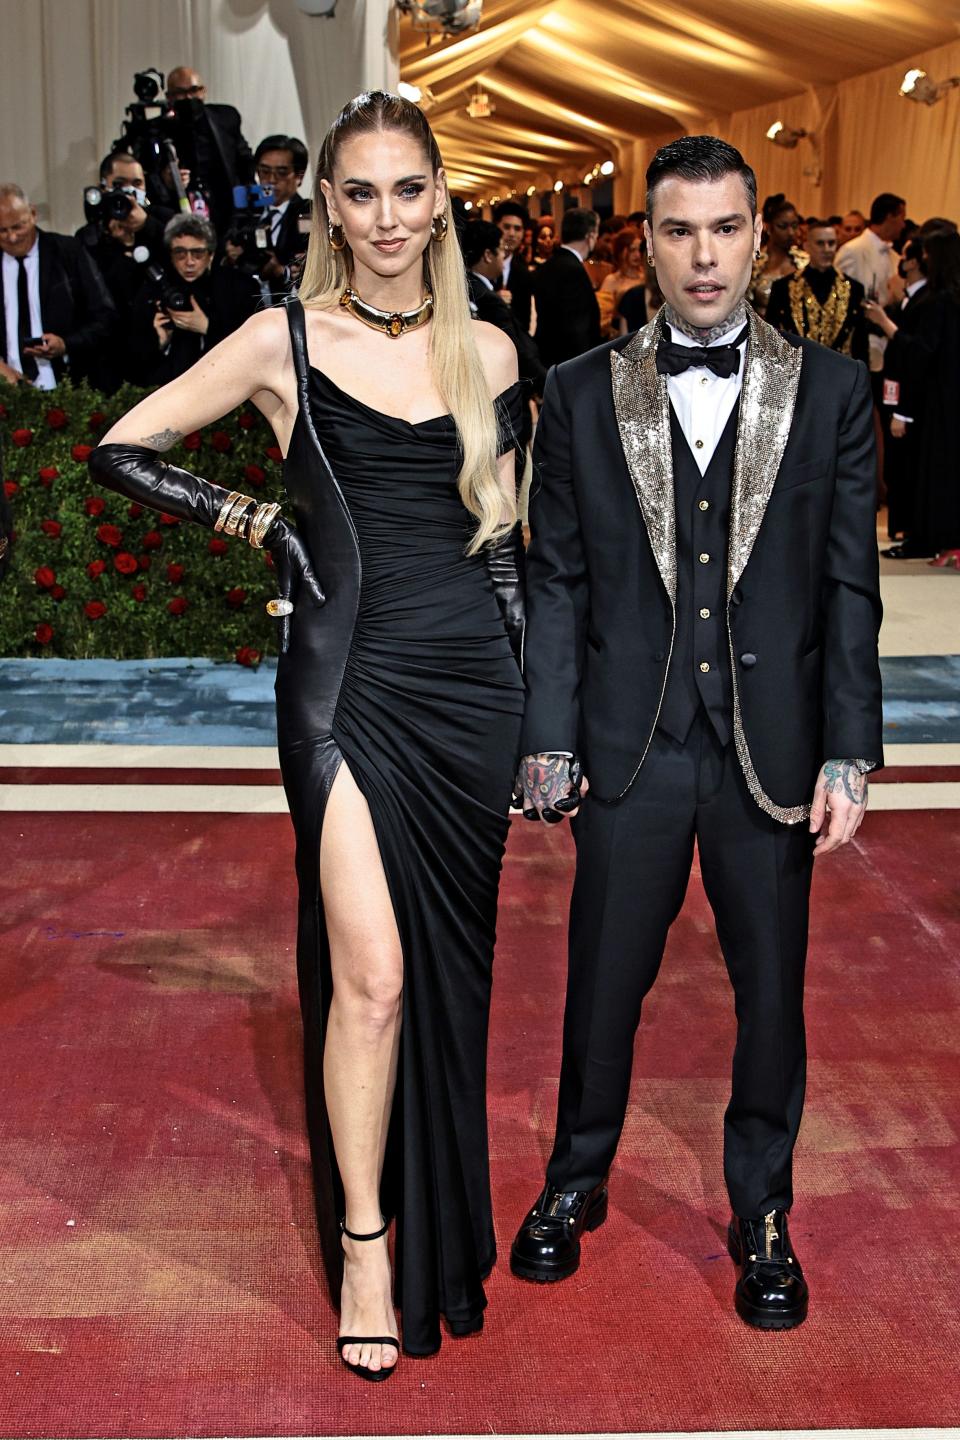 Chiara in a black gown, gloves, and heels and Fedez standing shorter in a black suit with metallic trim on a red carpet.